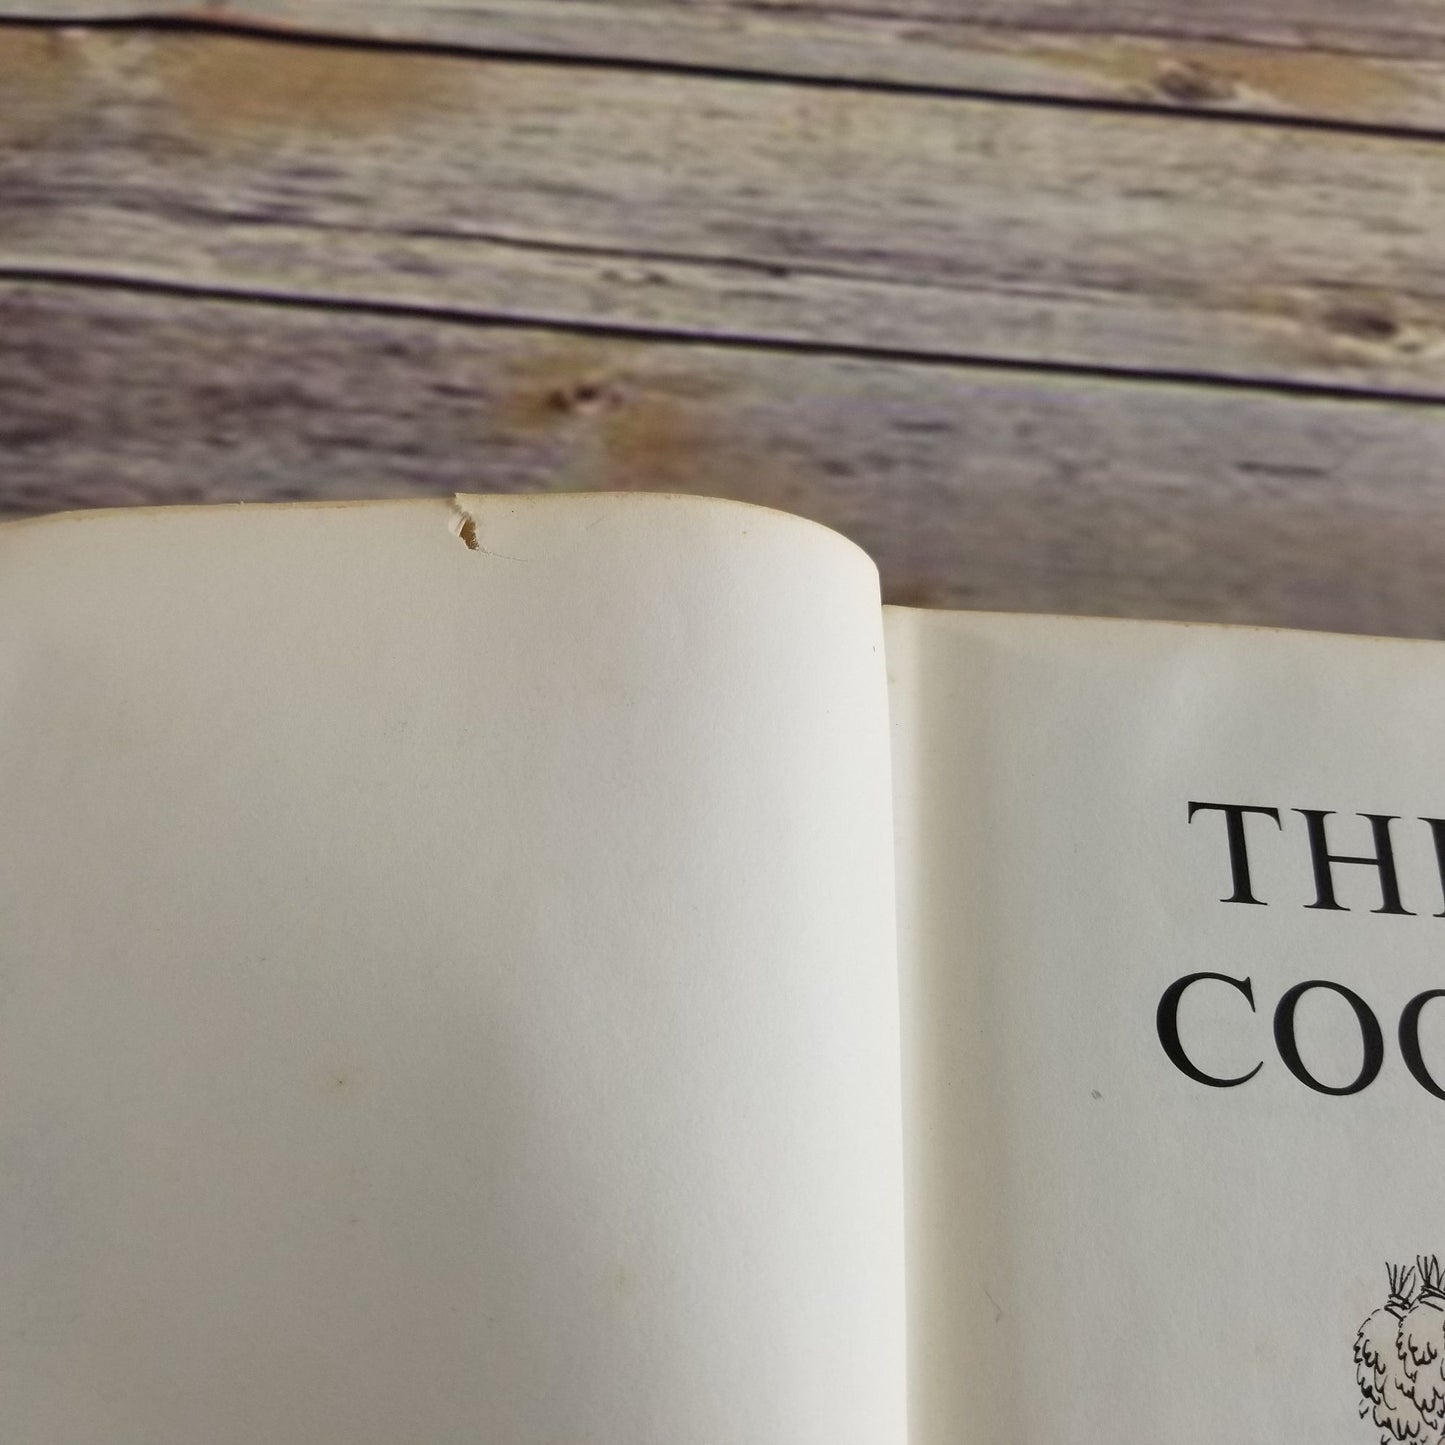 Vintage Cookbook The Spice Cook Book Recipes 1964 Hardcover NO Dust Jacket Avanelle DayLillie Stuckey